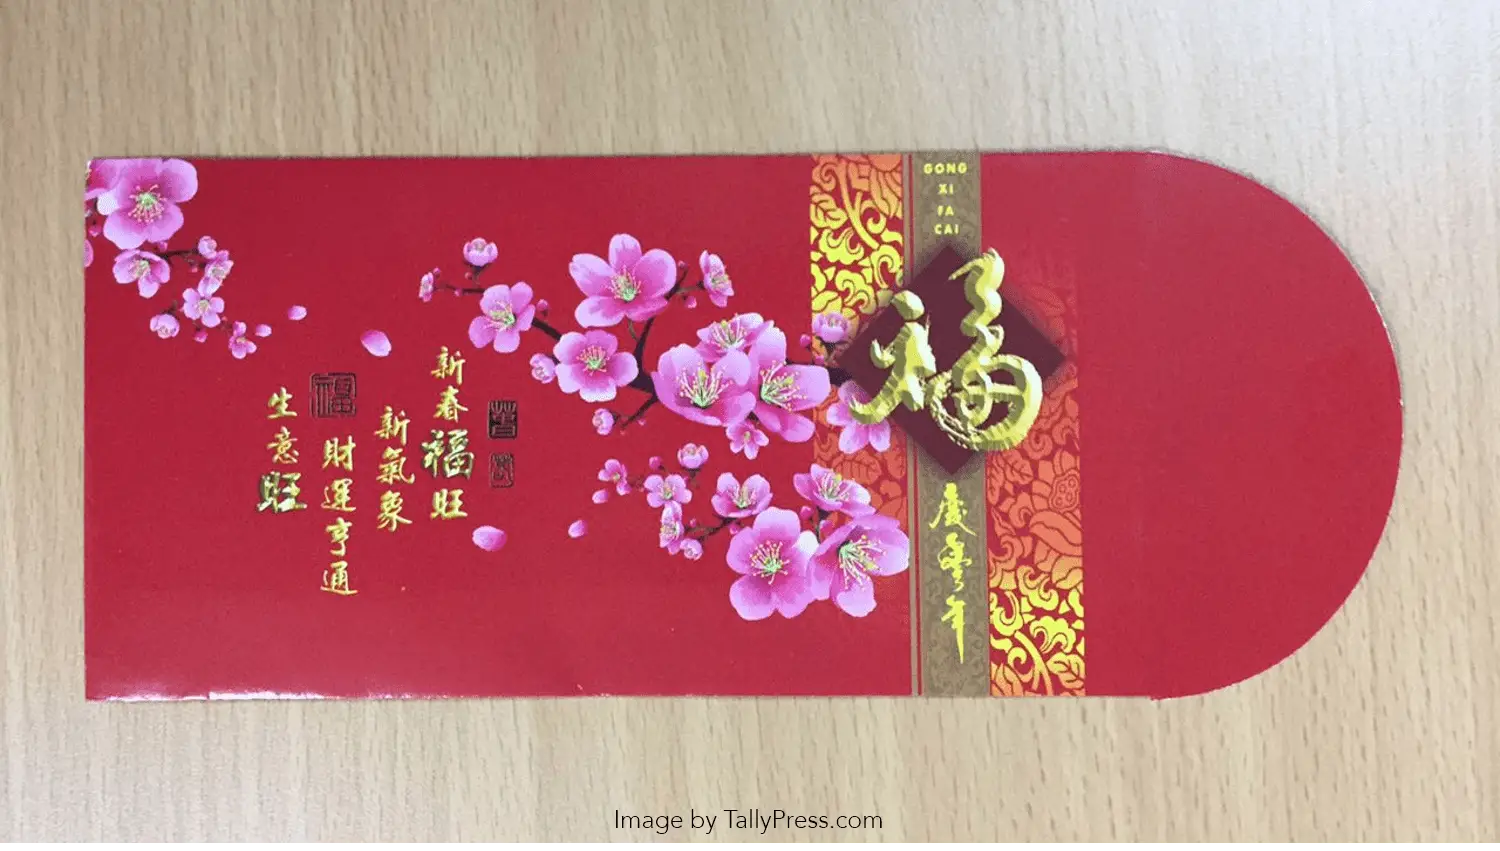 2017 Ang Pao Design by Affin Bank